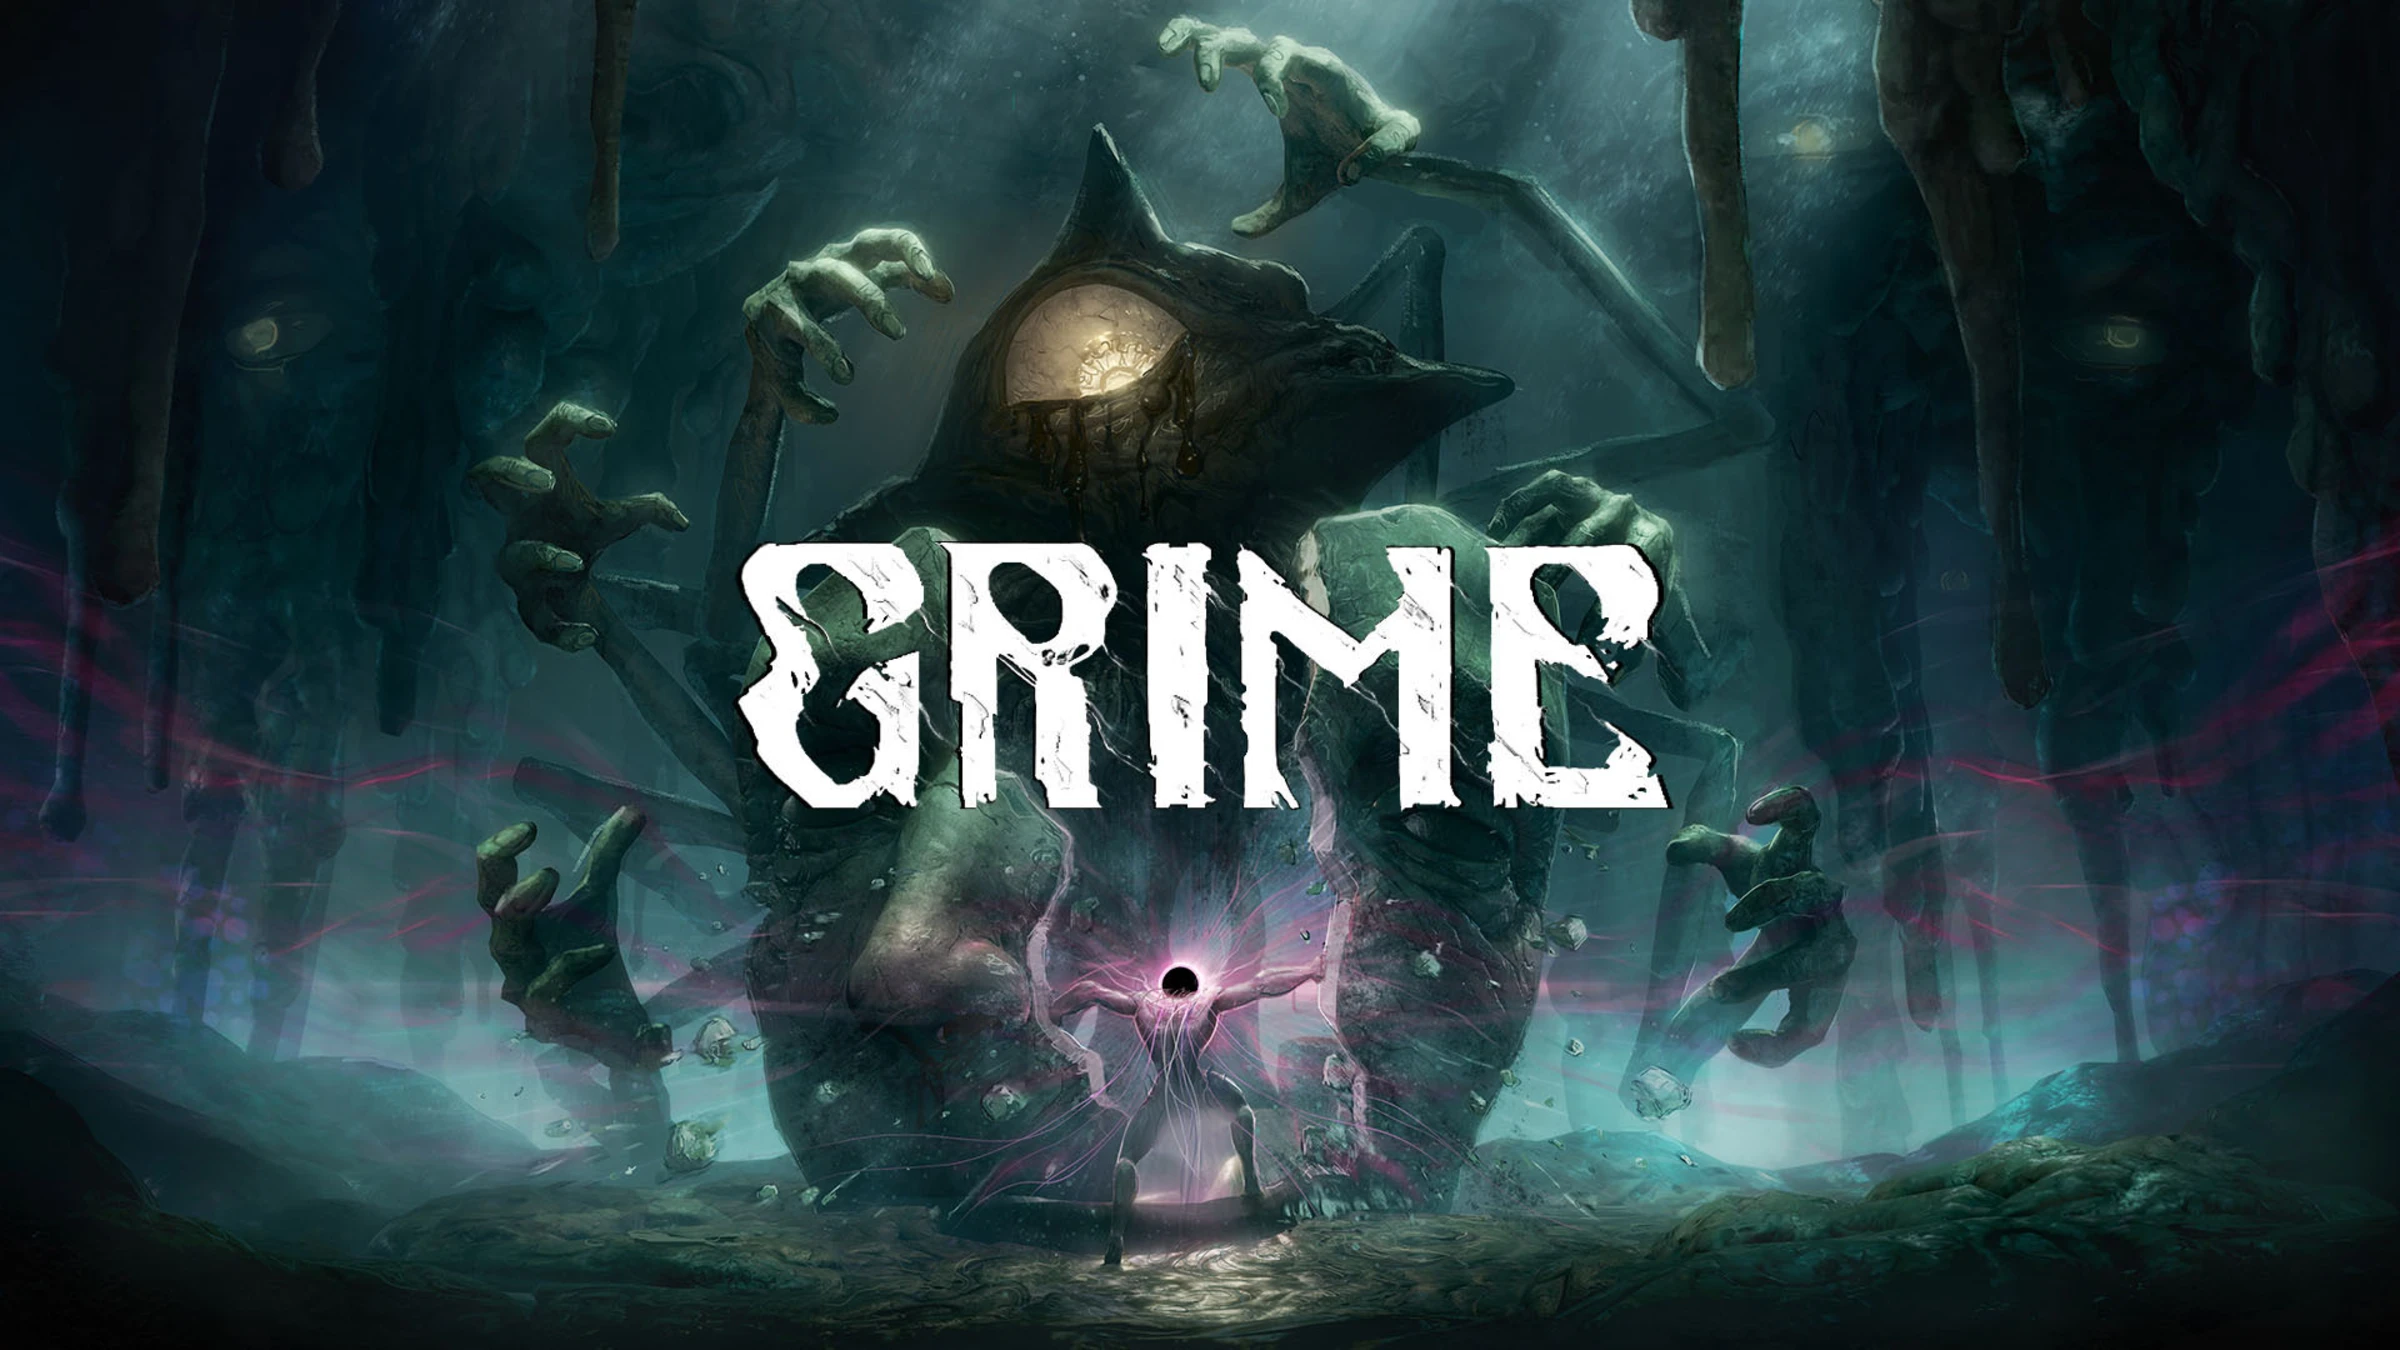 GRIME will be released on Nintendo Switch on January 25 with all free add-ons